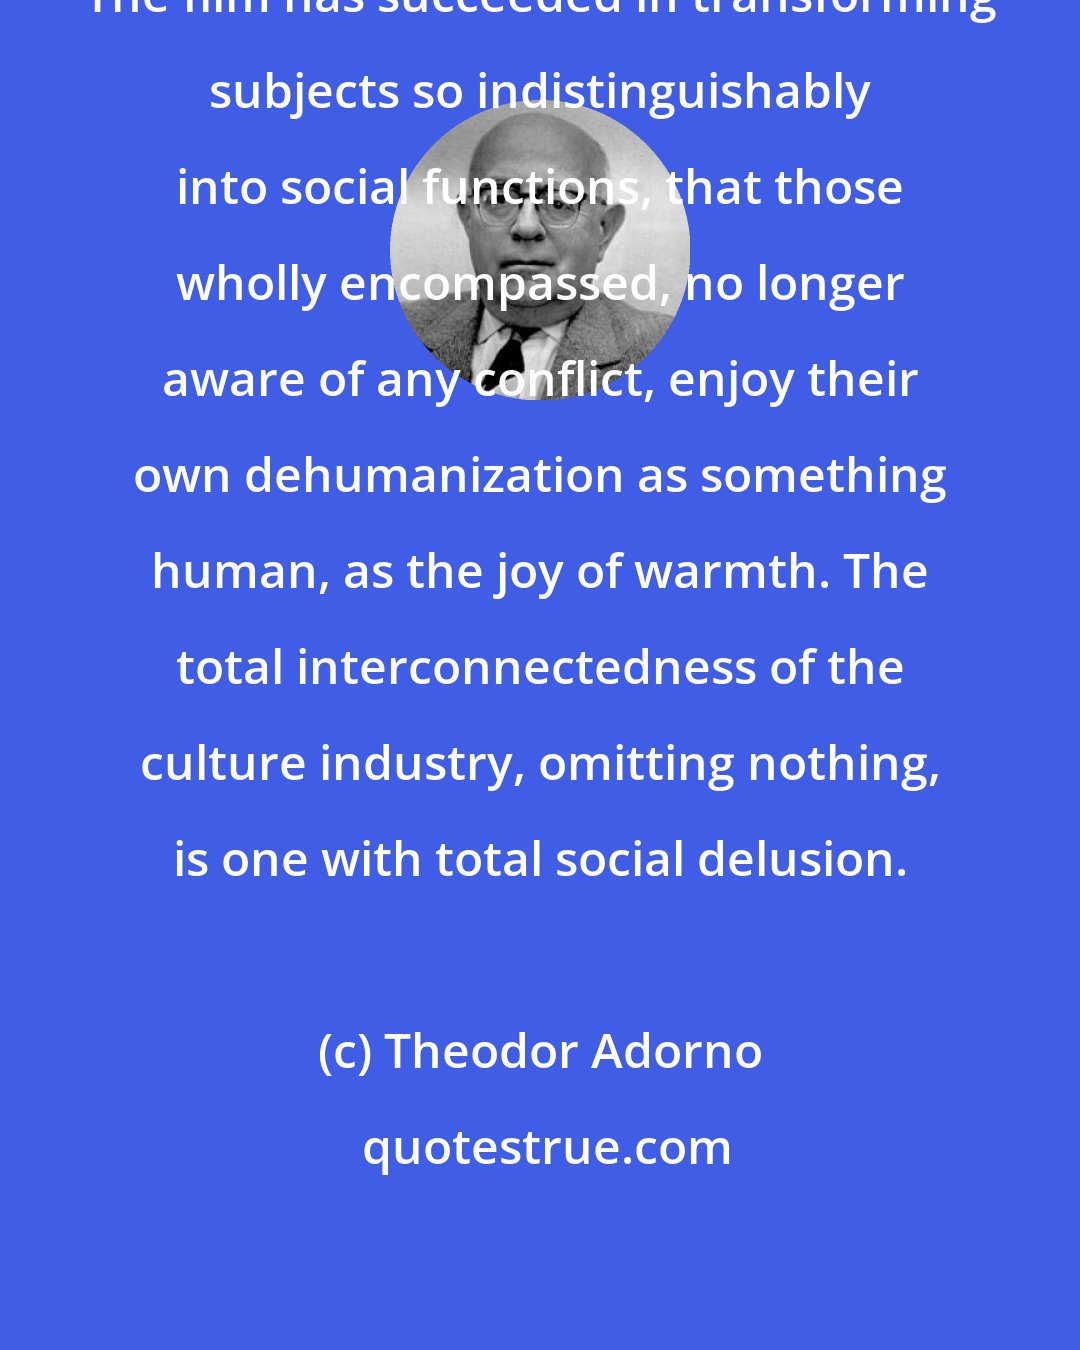 Theodor Adorno: The film has succeeded in transforming subjects so indistinguishably into social functions, that those wholly encompassed, no longer aware of any conflict, enjoy their own dehumanization as something human, as the joy of warmth. The total interconnectedness of the culture industry, omitting nothing, is one with total social delusion.